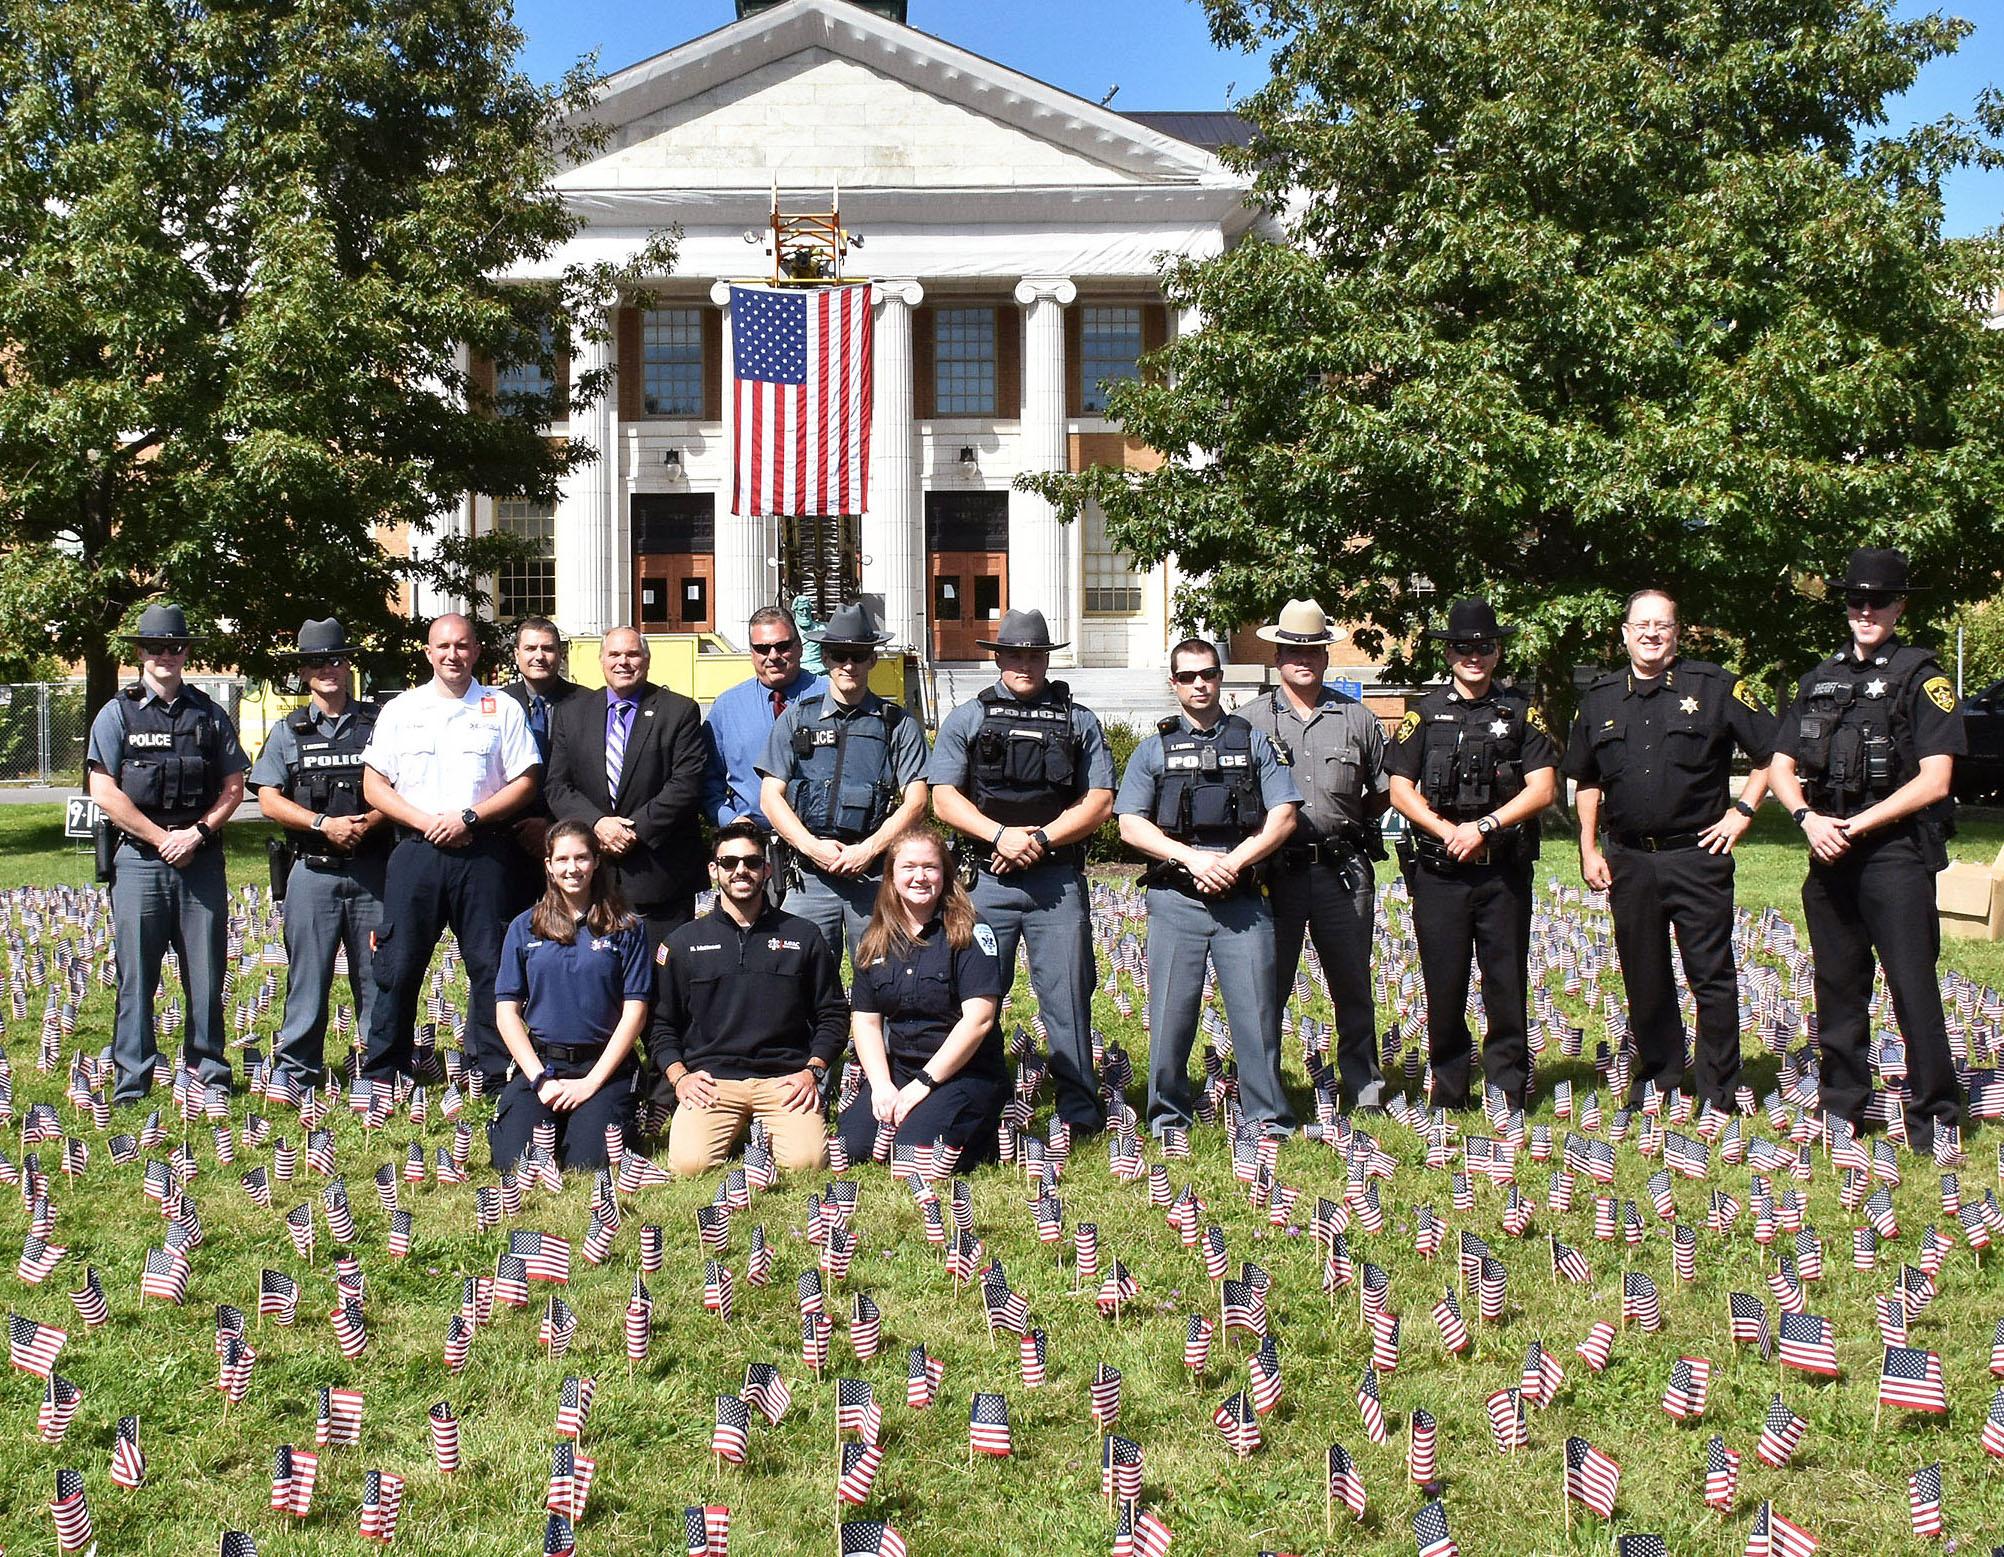 University Police and local law enforcement and first responders participated in this year's effort to plant 2,996 flags in front of Sheldon Hall to remember the lives lost in the Sept. 11, 2001 terrorist attacks.